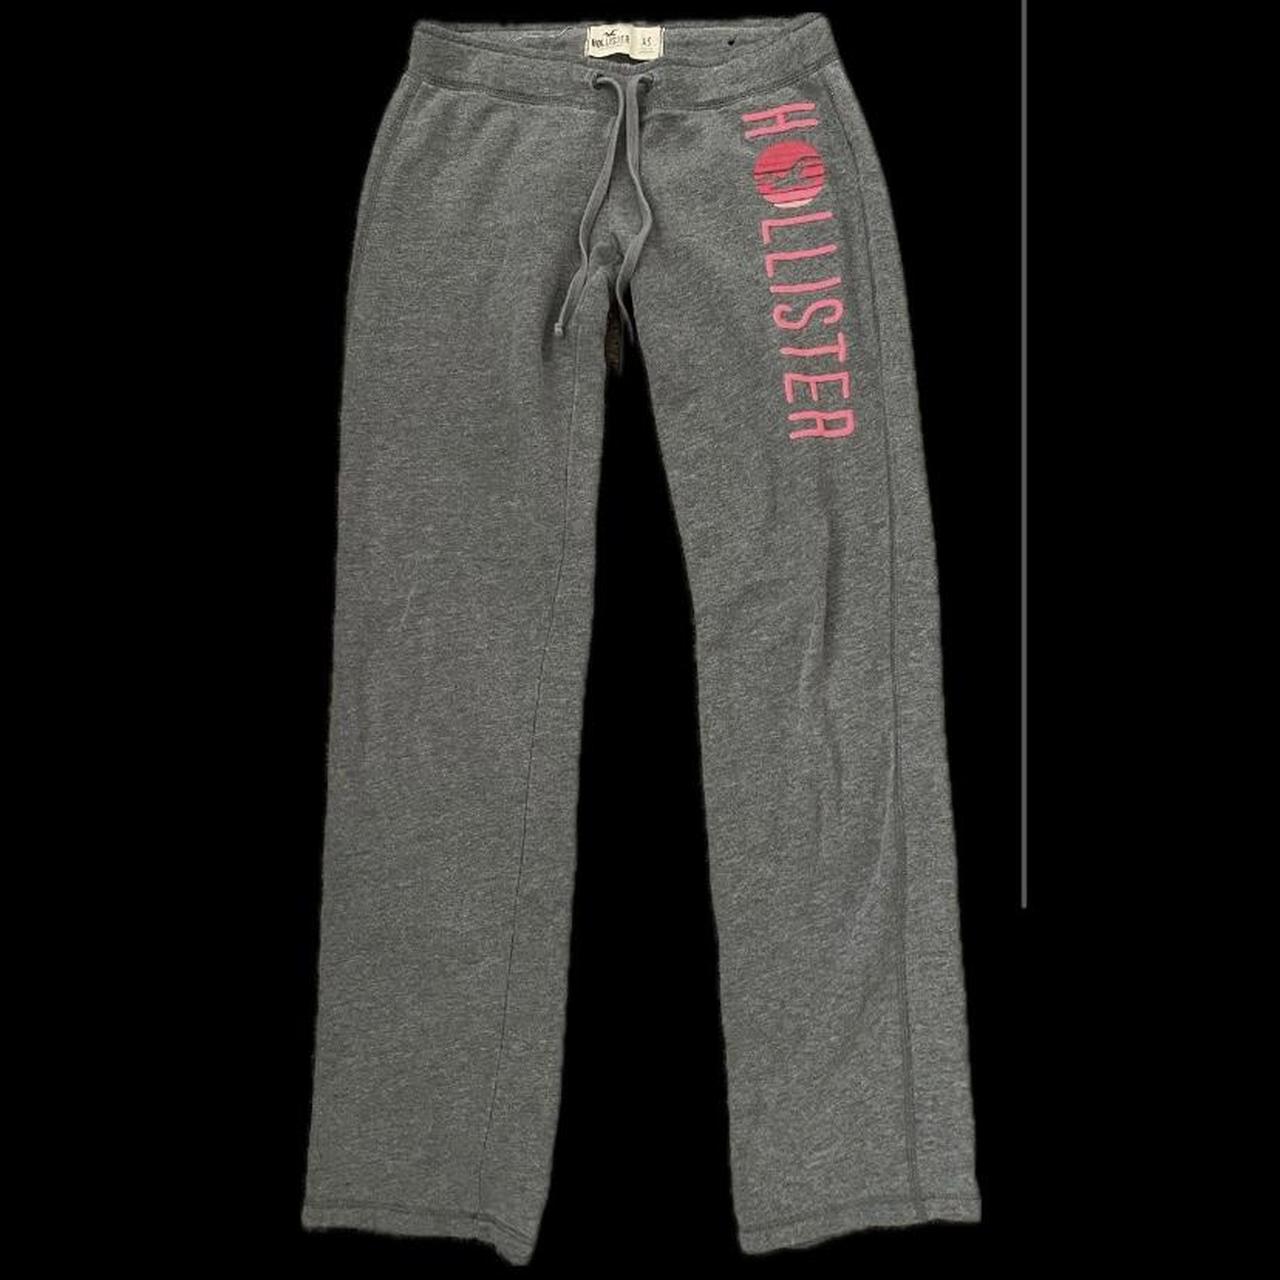 Hollister gray sweat pants with pink Hollister - Depop